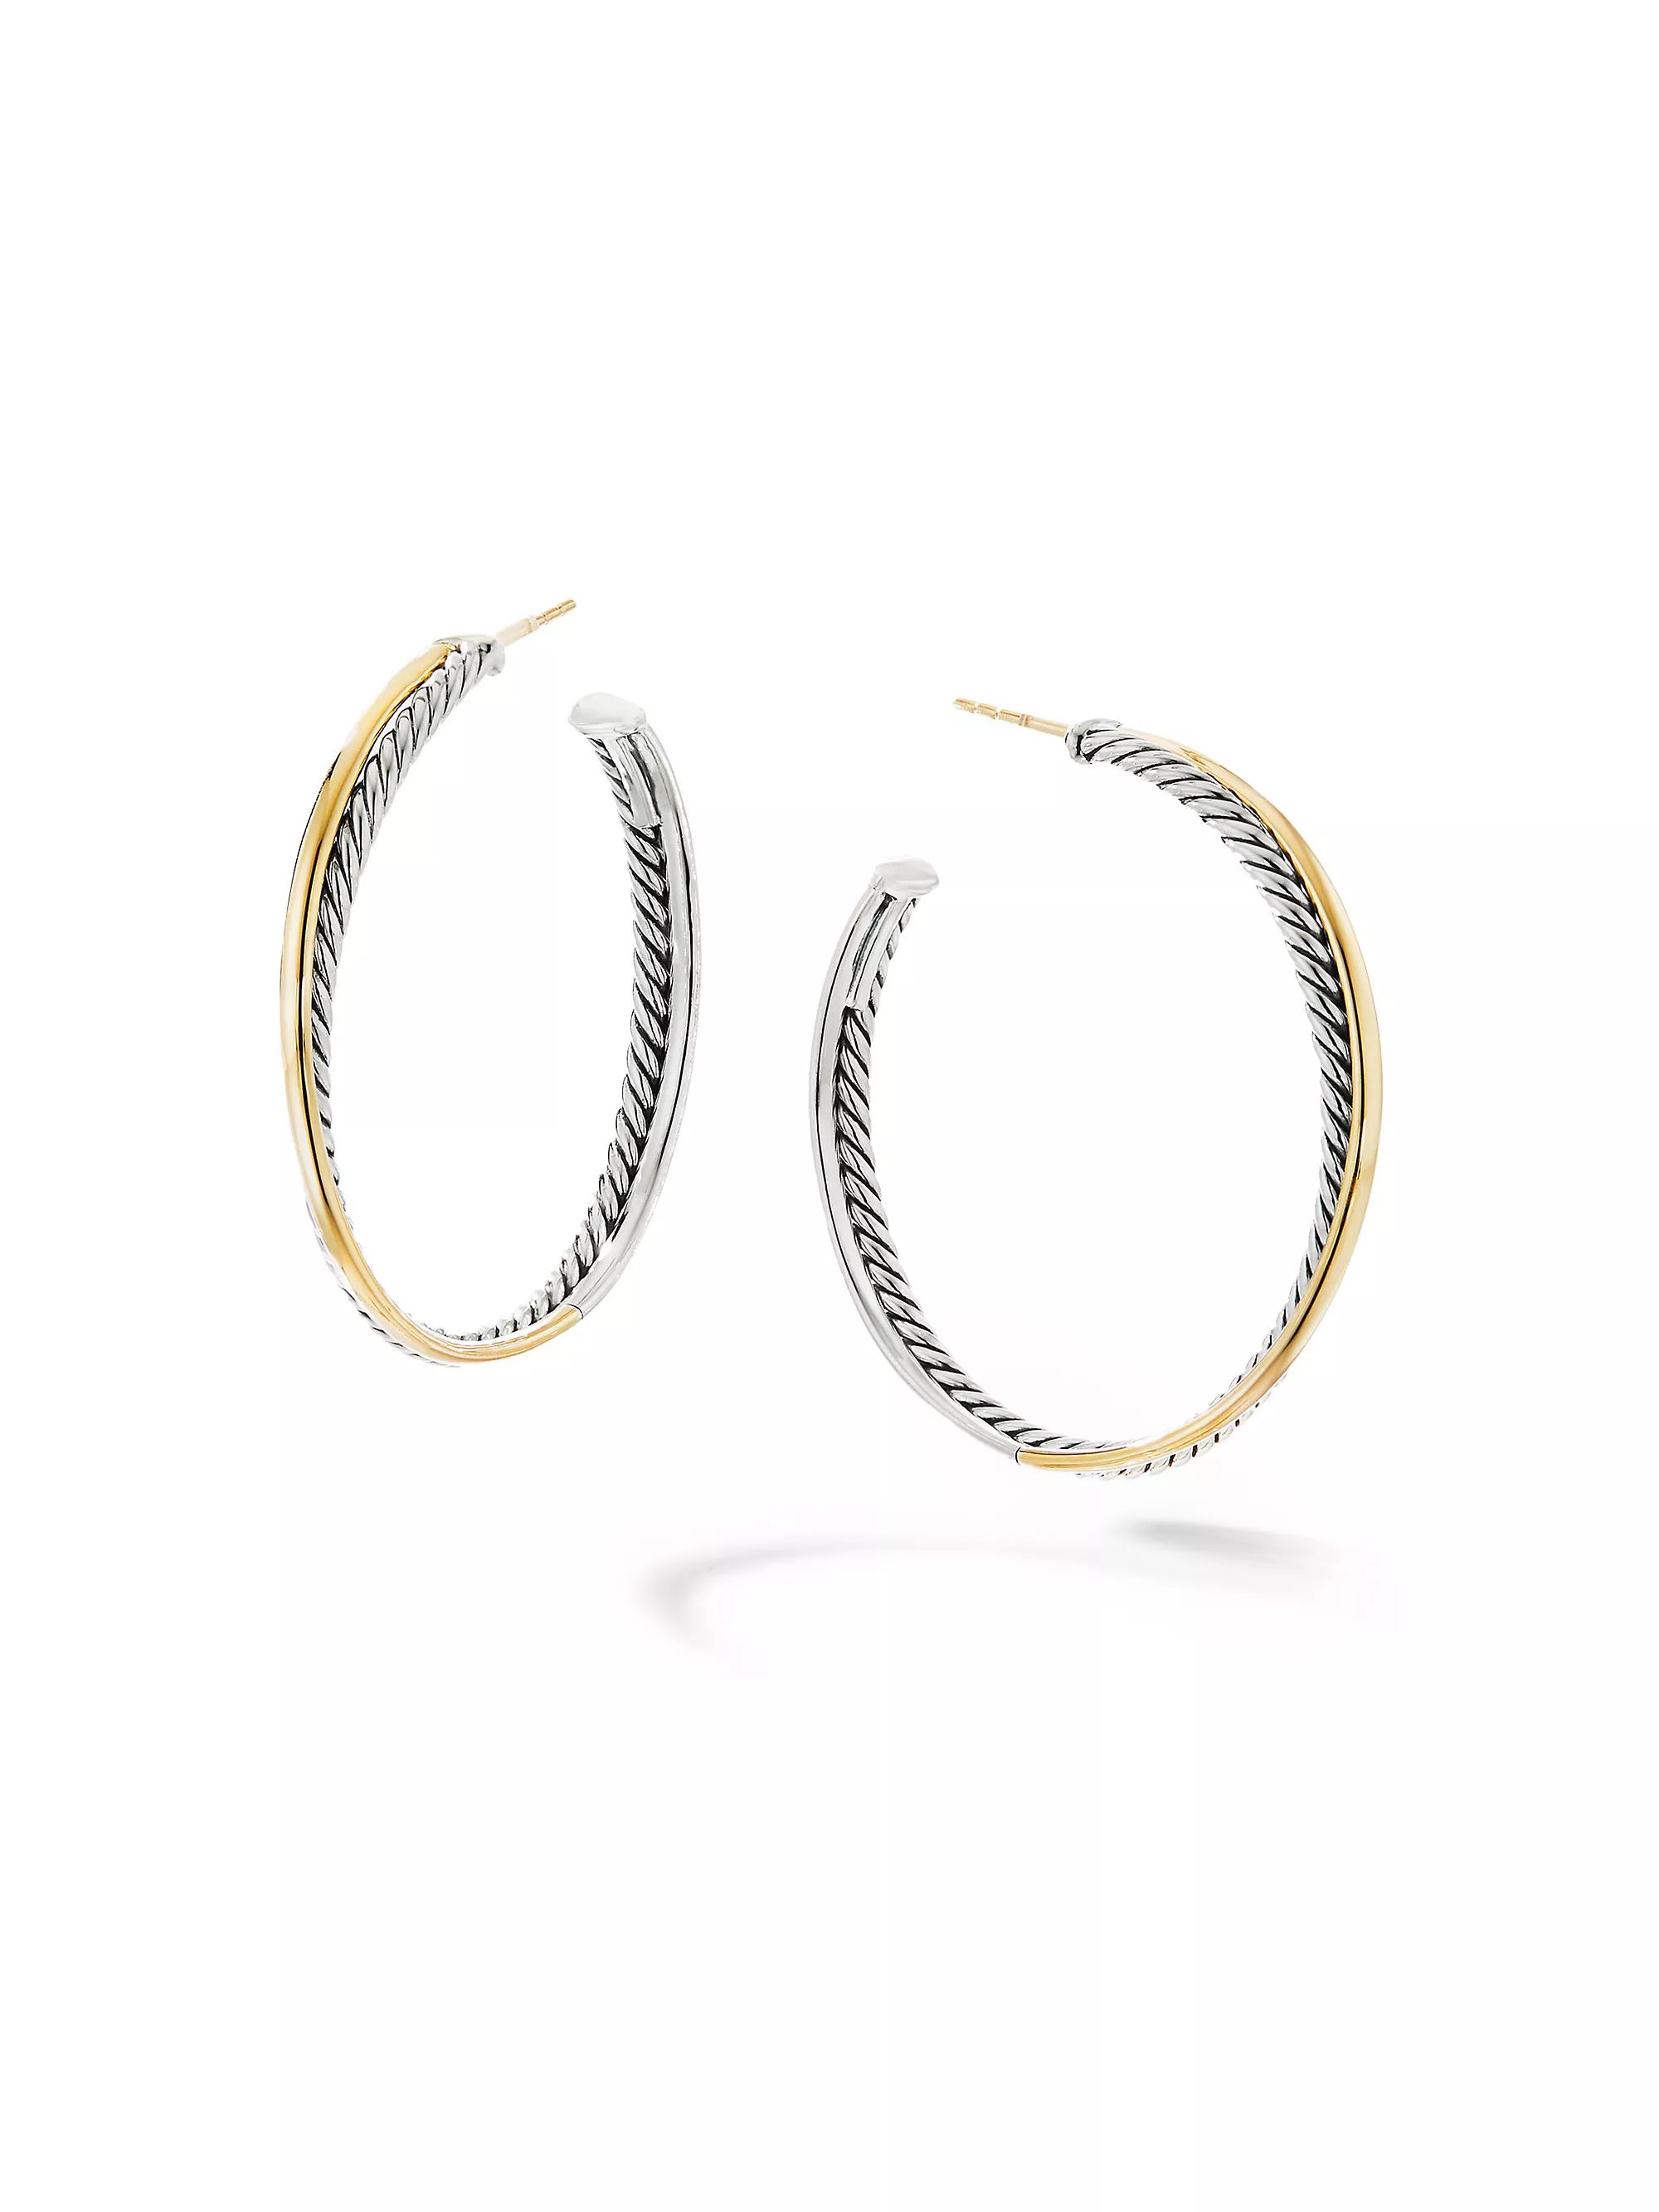 Crossover Hoop Earrings in Sterling Silver with 18K Yellow Gold | Saks Fifth Avenue